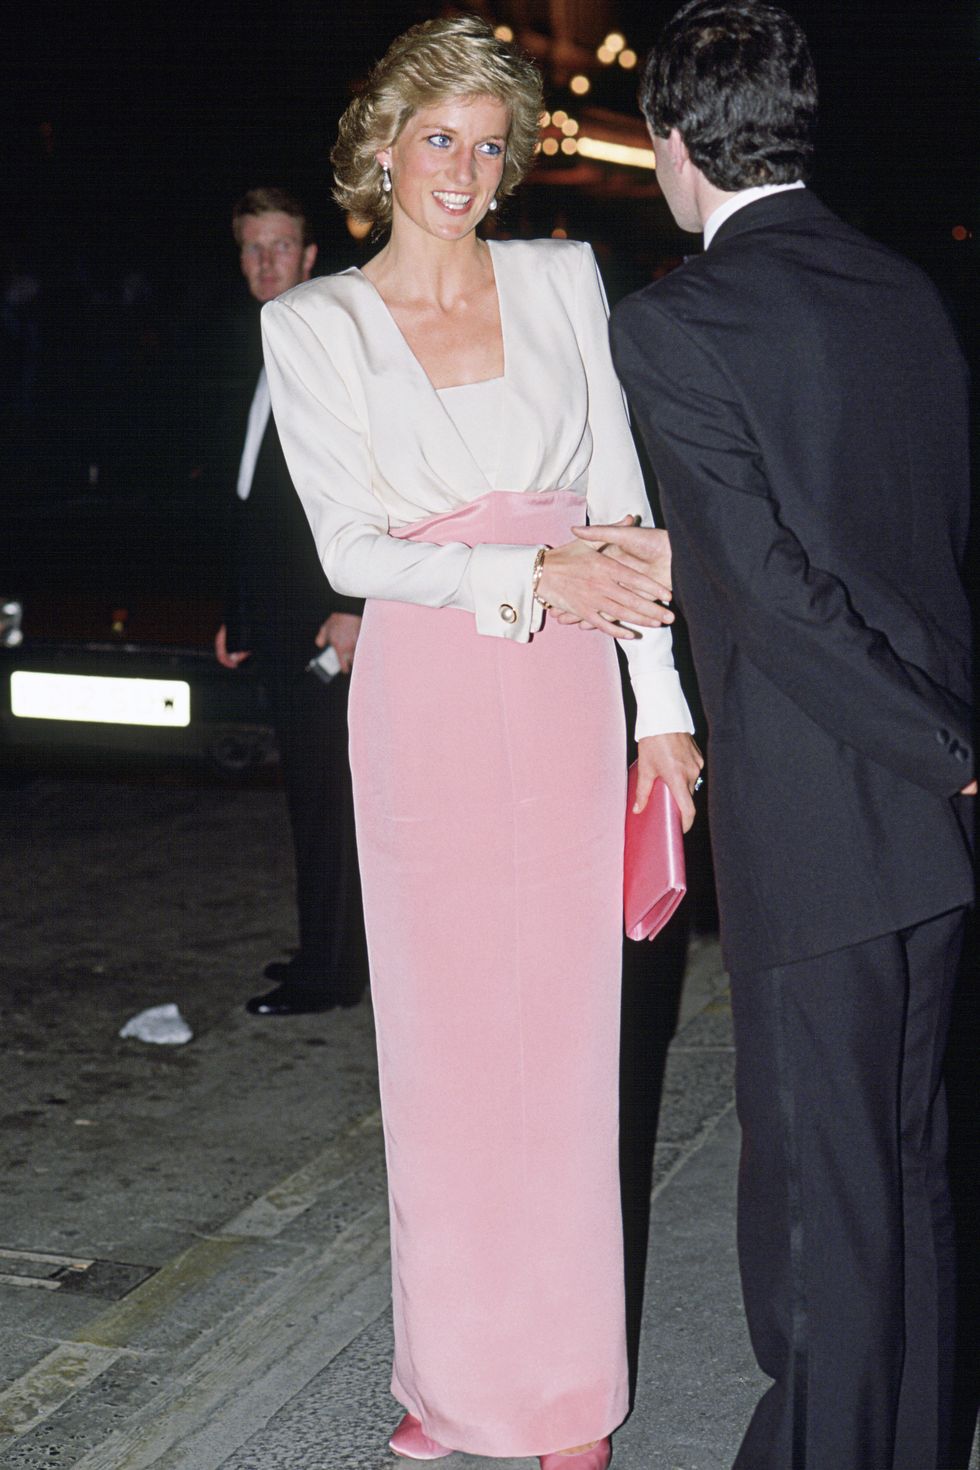 LONDON, UNITED KINGDOM - JULY 27:  Princess Diana Attending A Performance Of The Ballet 'swan Lake'  At The Coliseum In London. She Is Wearing A Dress Designed By Catherine Walker.  (Photo by Tim Graham/Getty Images)